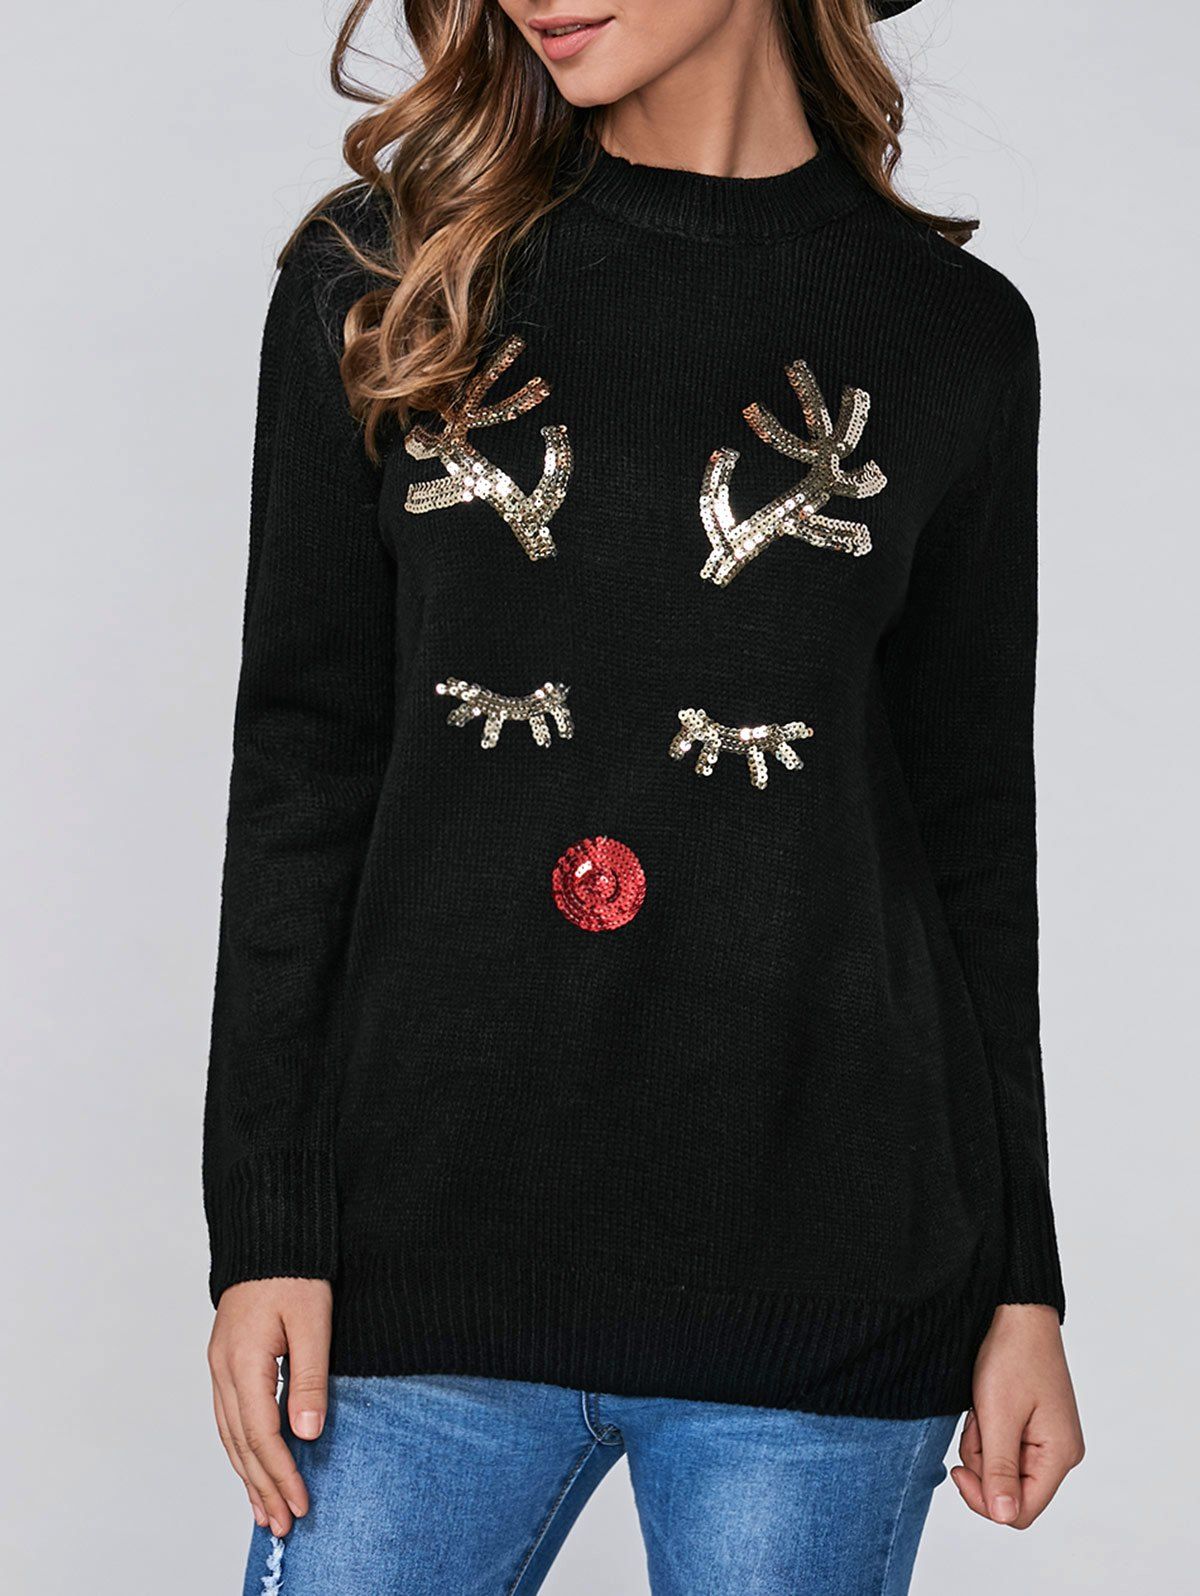 Christmas Sequins Deer Pullover Sweater - BLACK ONE SIZE